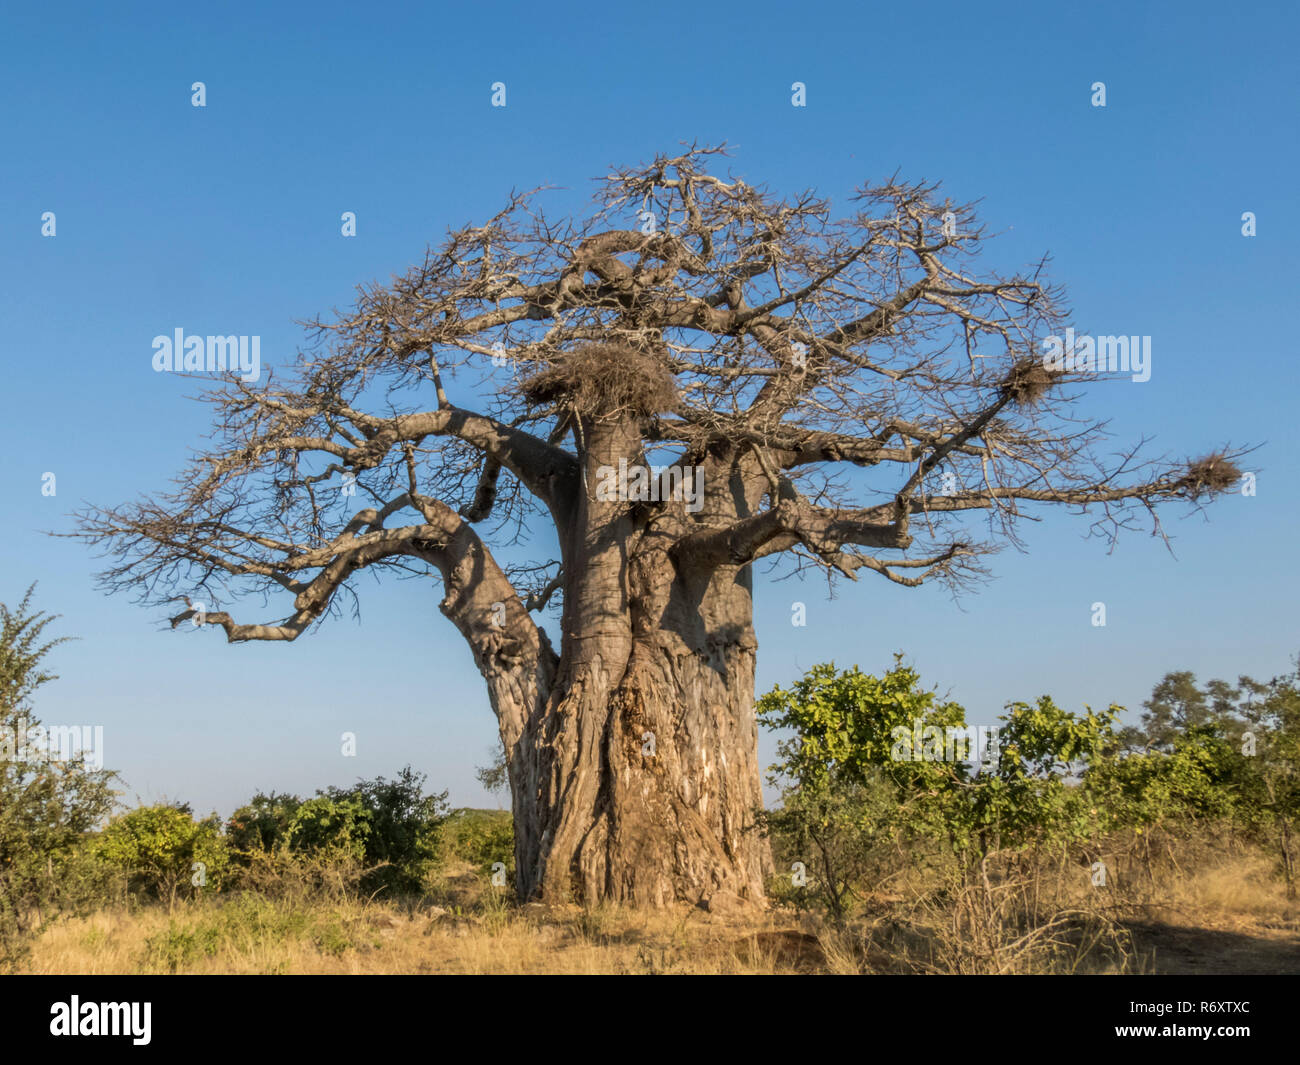 baobab tree in dry season, Kruger NP, South Africa Stock Photo